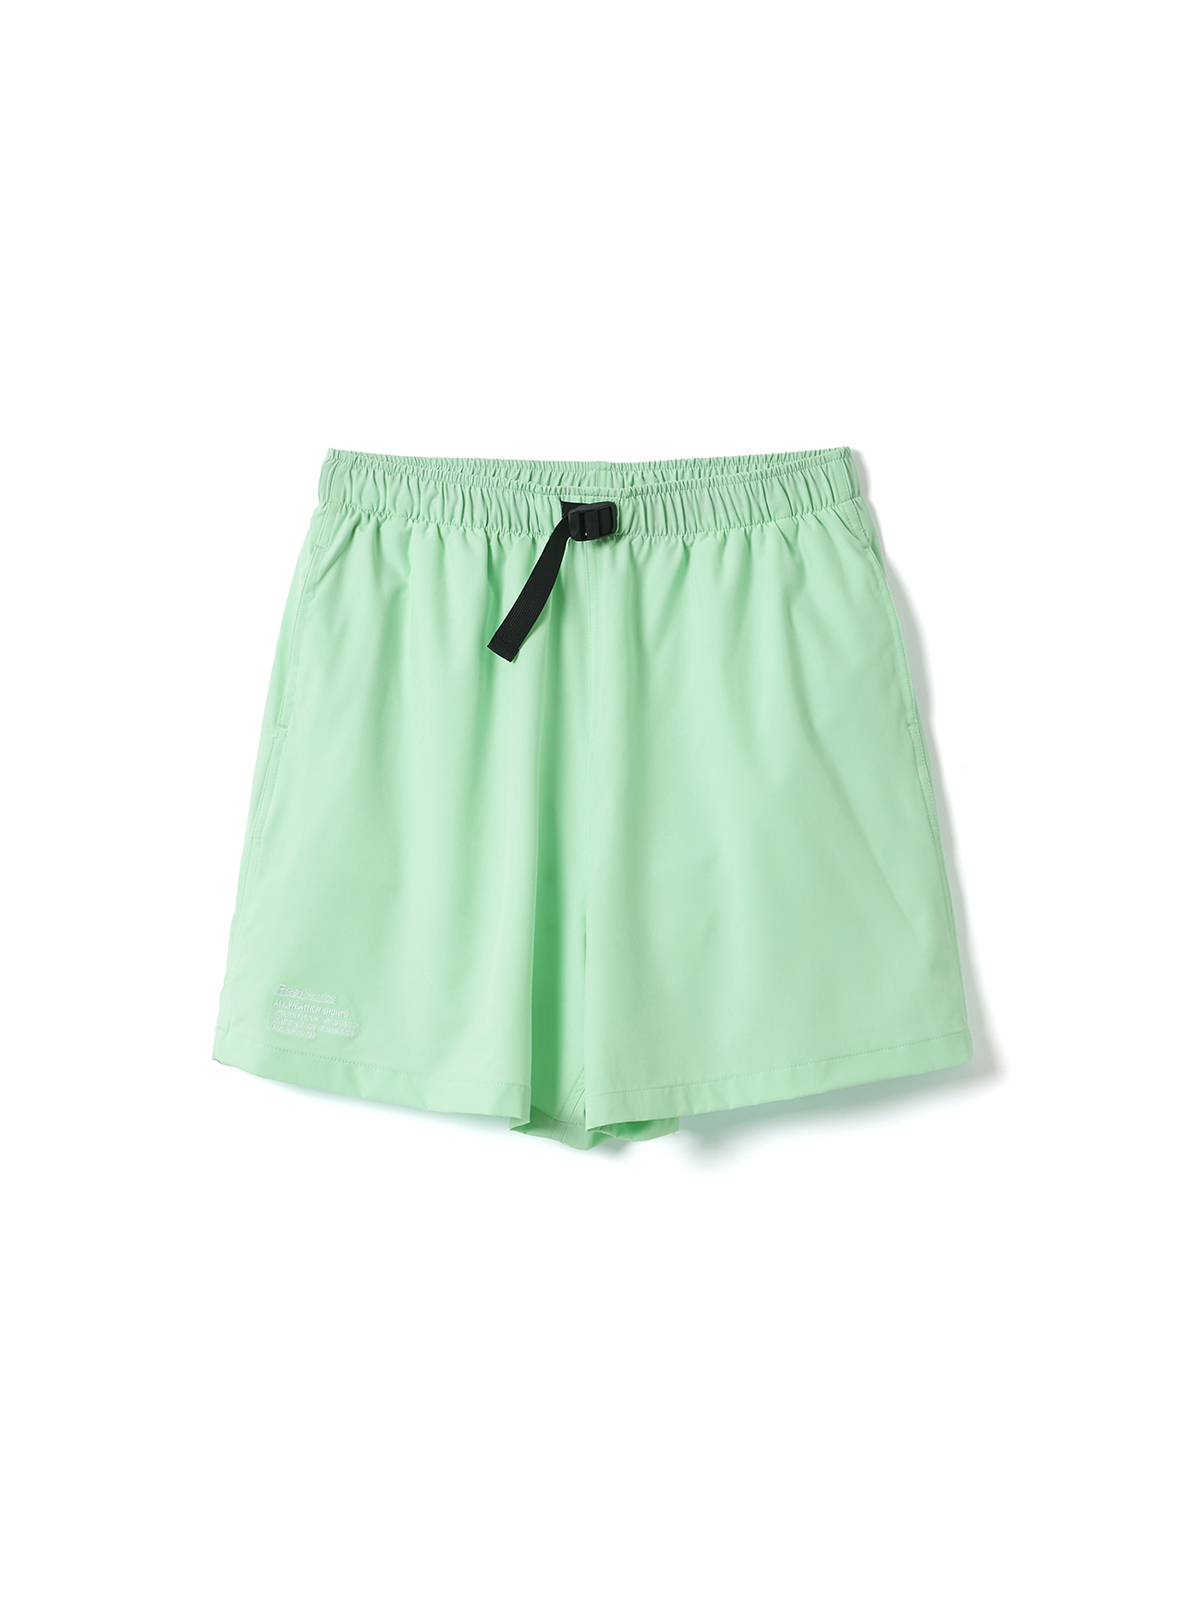 ALL WEATHER SHORTS (MINT)